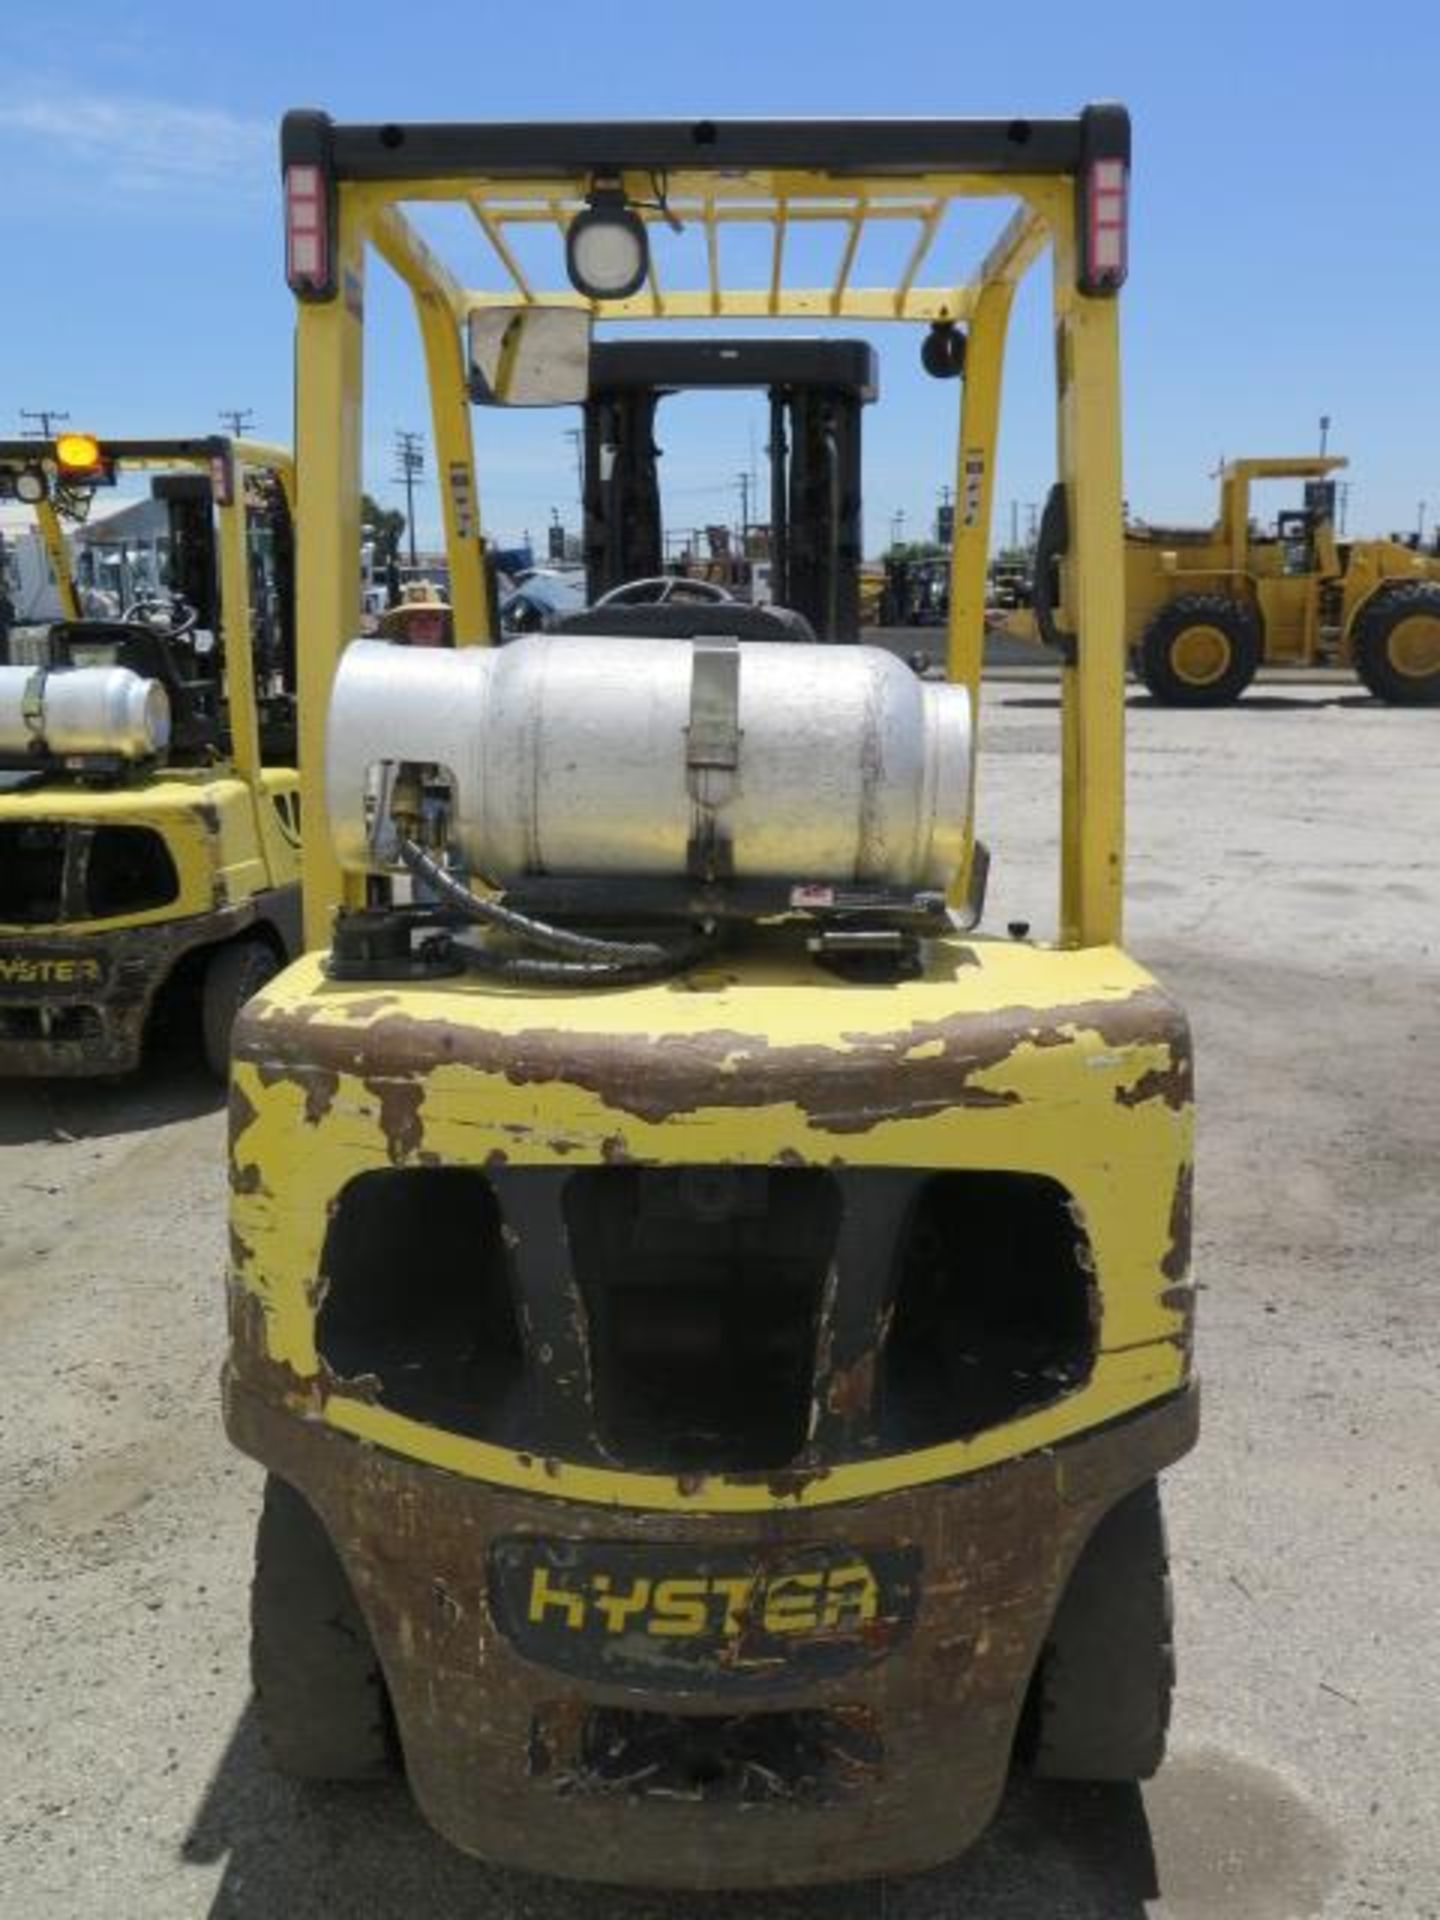 2018 Hyster H60FT 6000 Lb Cap LPG Forklift s/n P177V04957P w/ 3-Stage,182” Lift Height, SOLD AS IS - Image 9 of 21